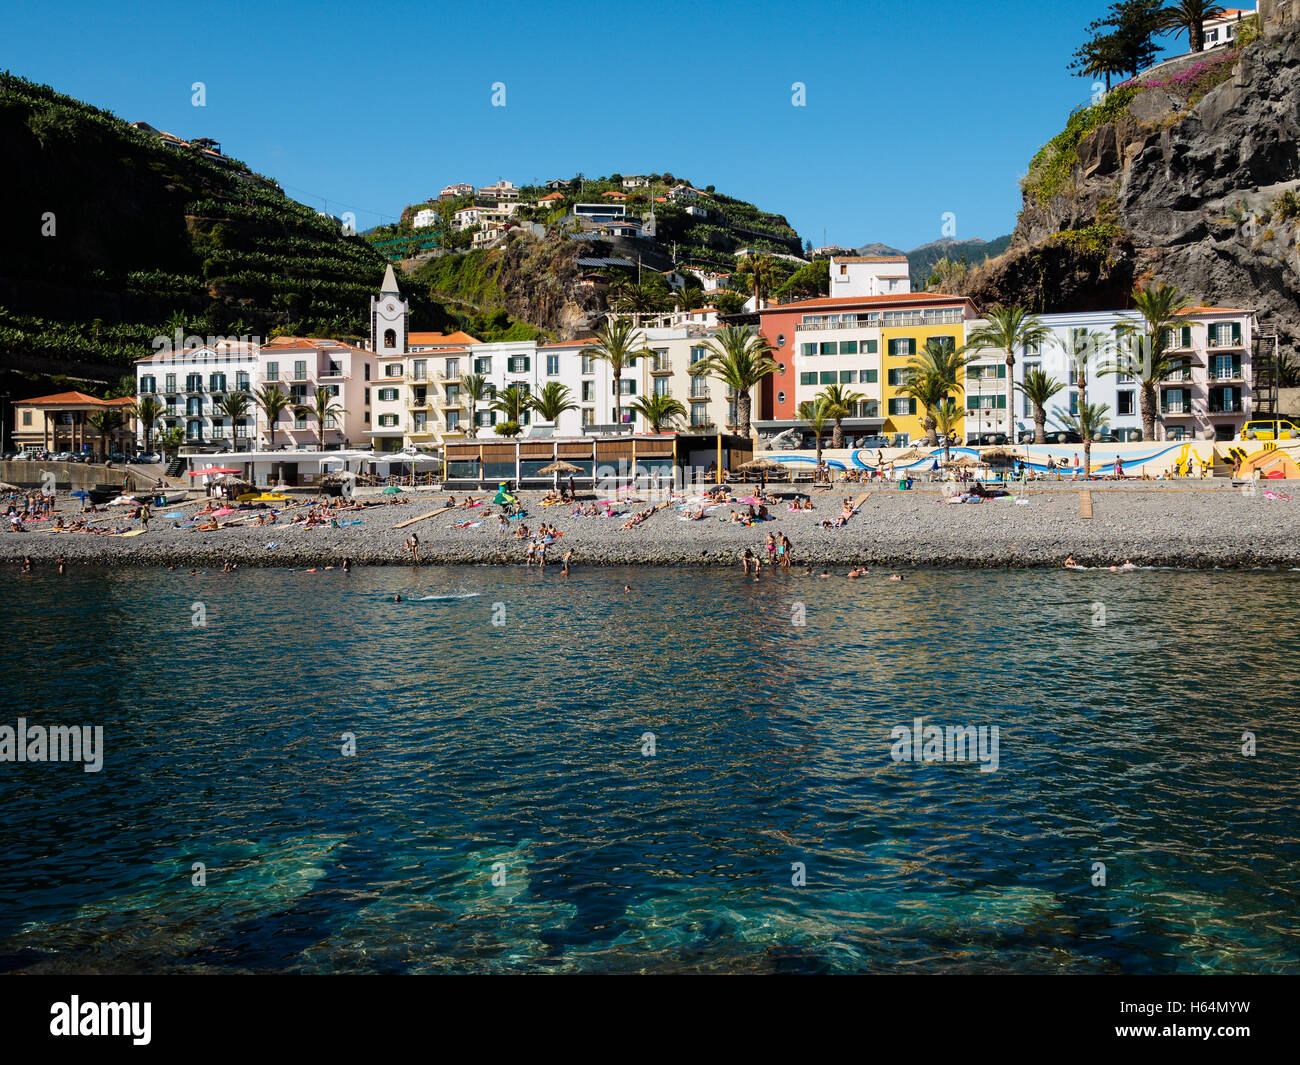 The beach of Ponta do Sol with the Enotel hotel on the Portuguese island of Madeira Stock Photo